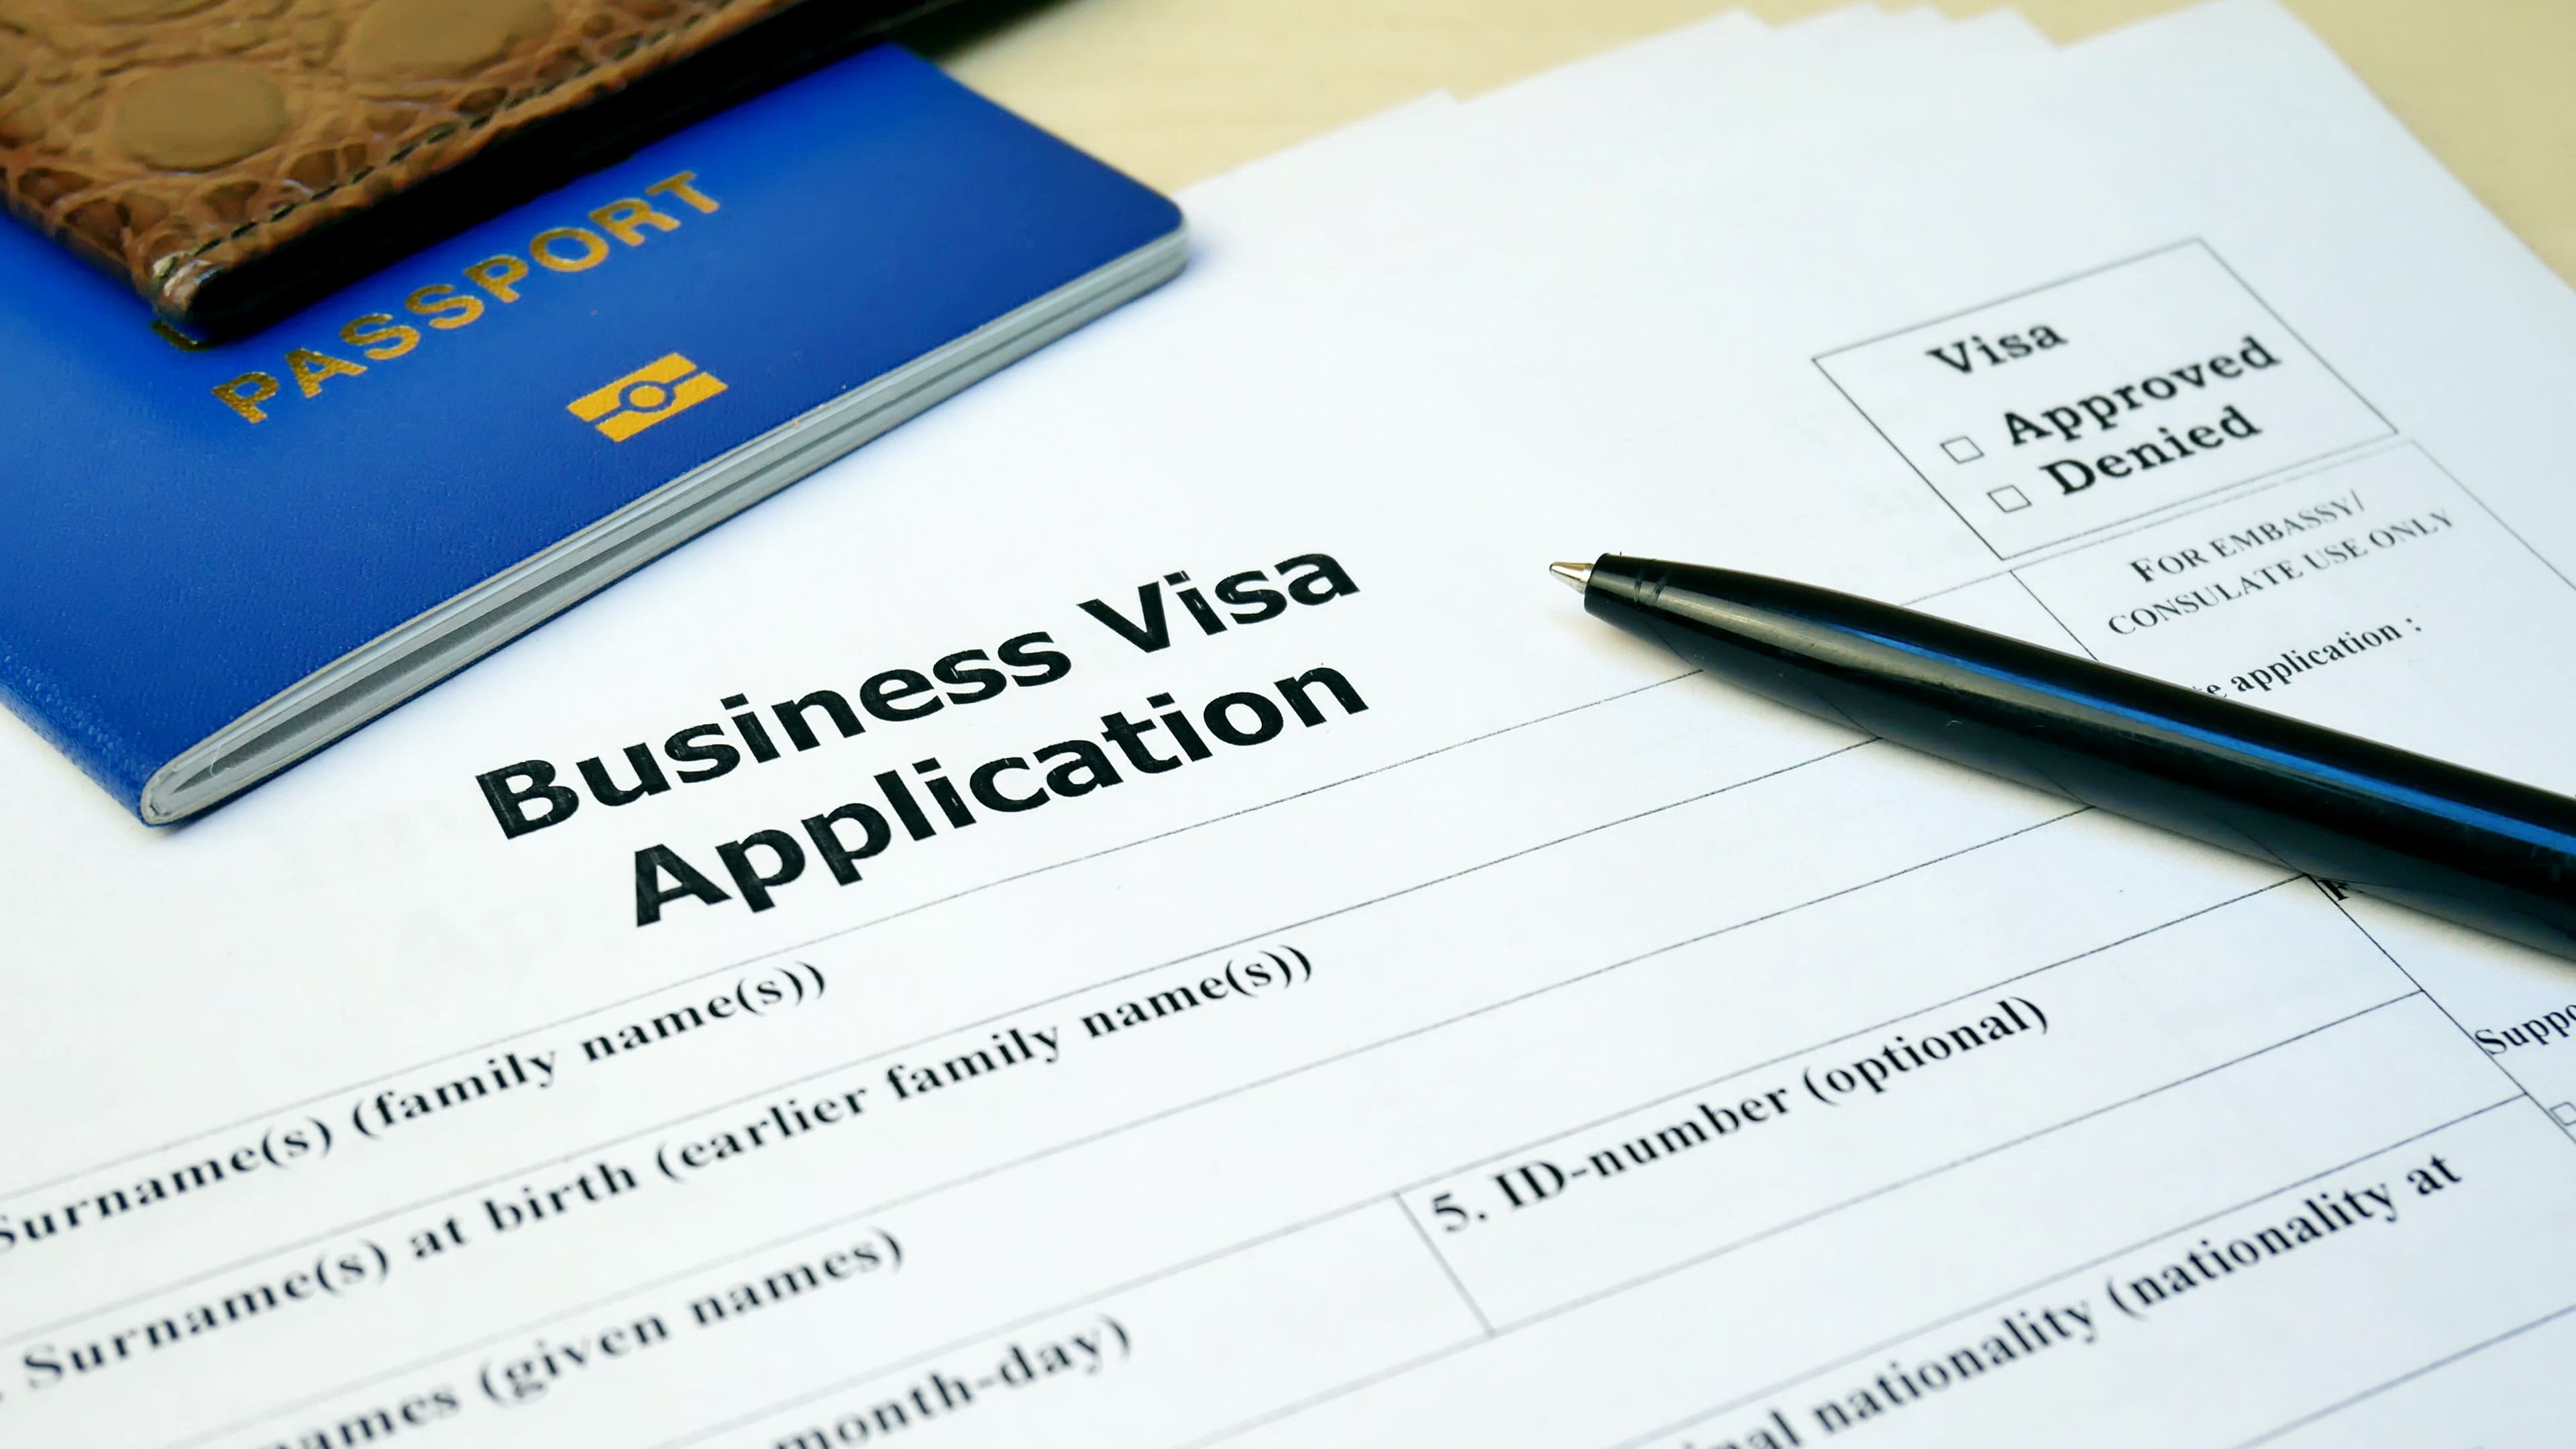 Do you need to visit Kenya for business? Here is what you need to know about the Business Visa